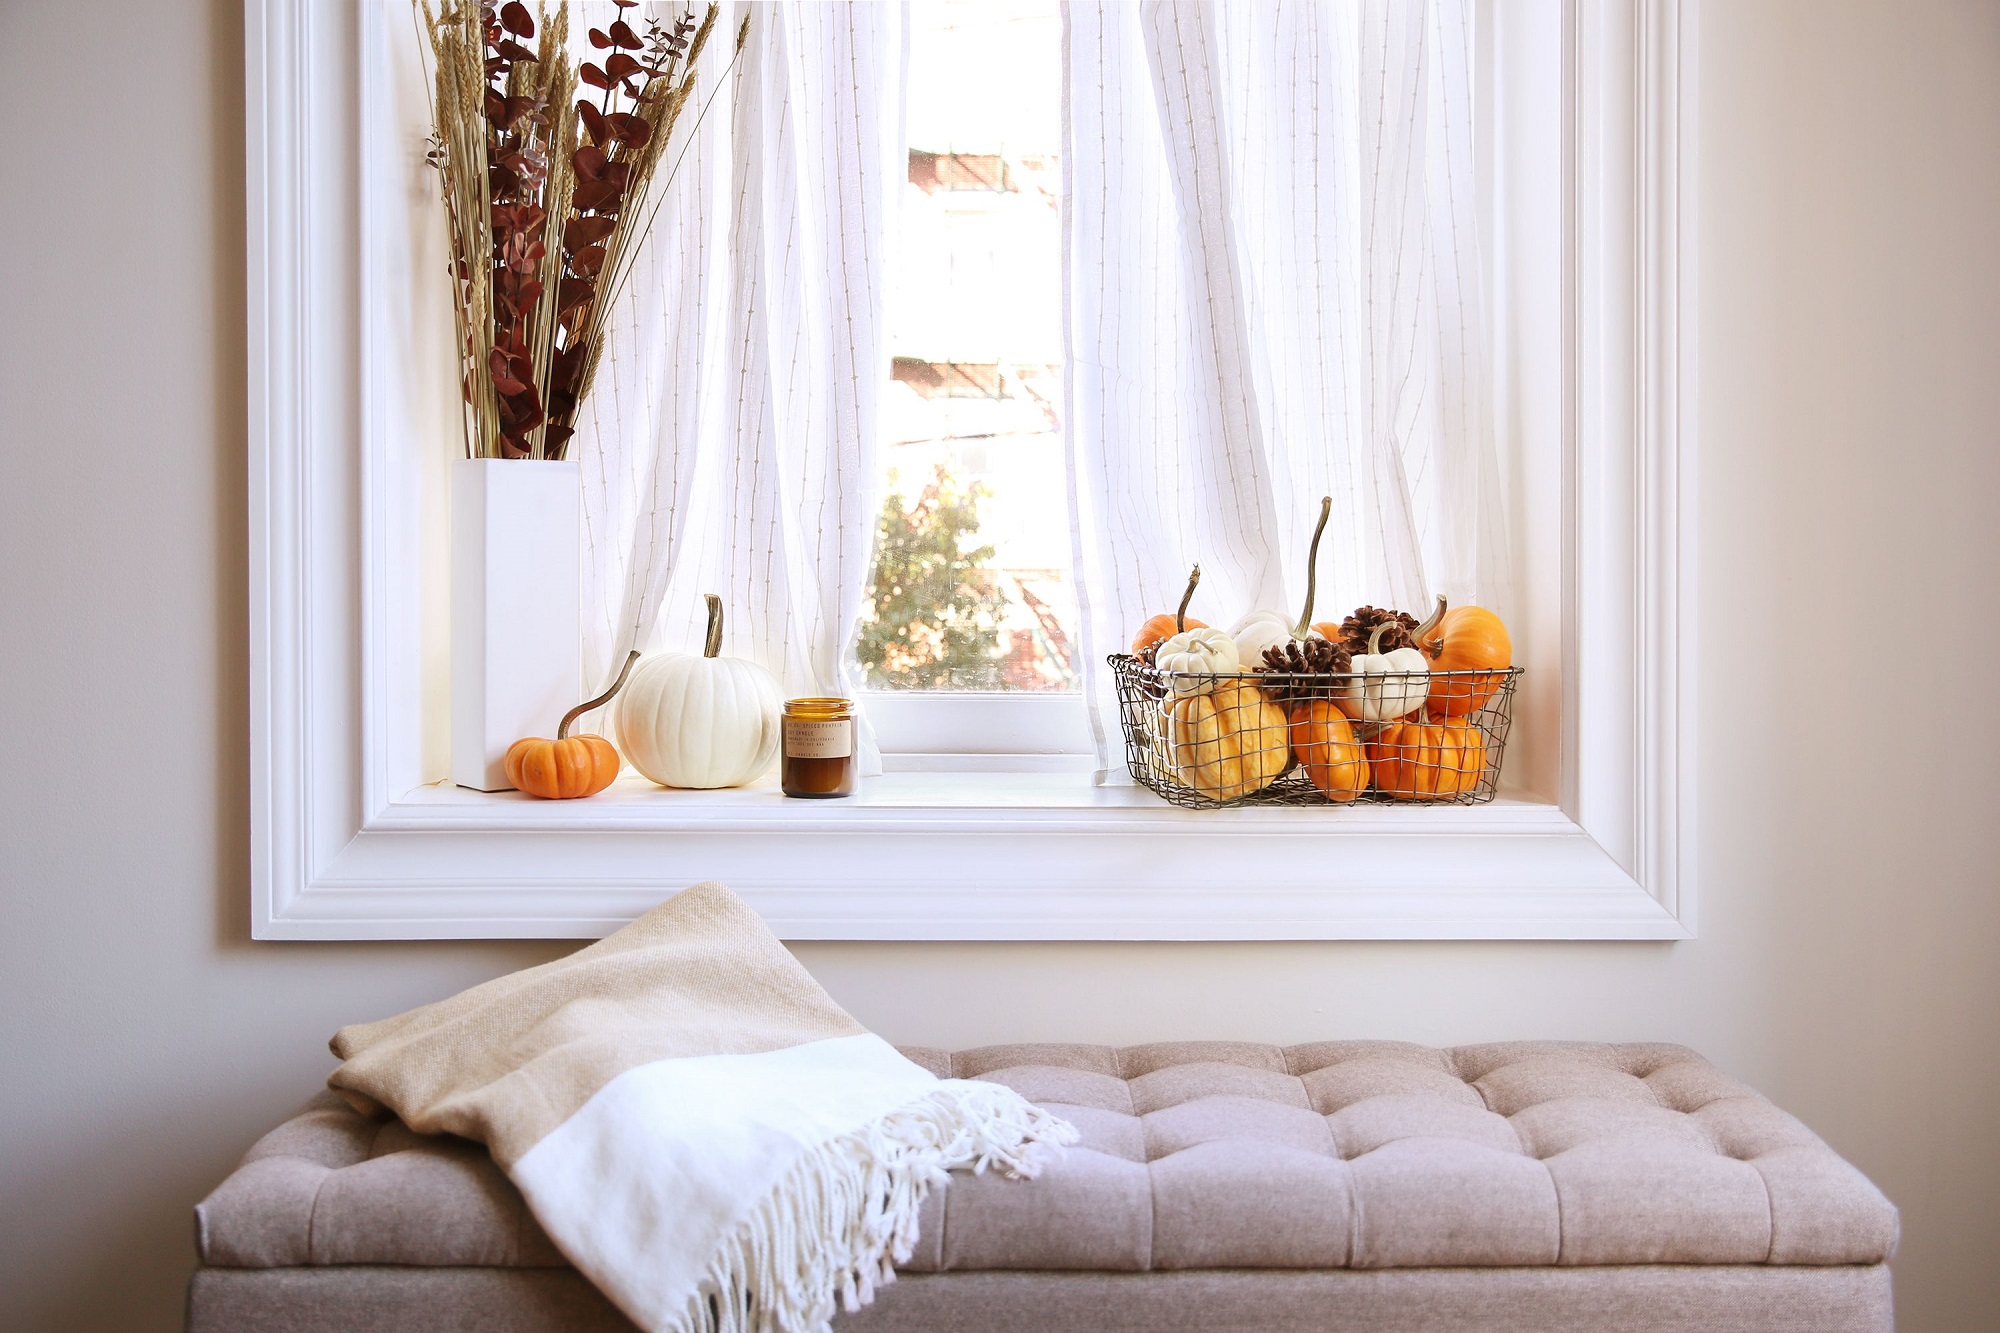 t3-75 Thanksgiving decorating ideas that will make your home look great